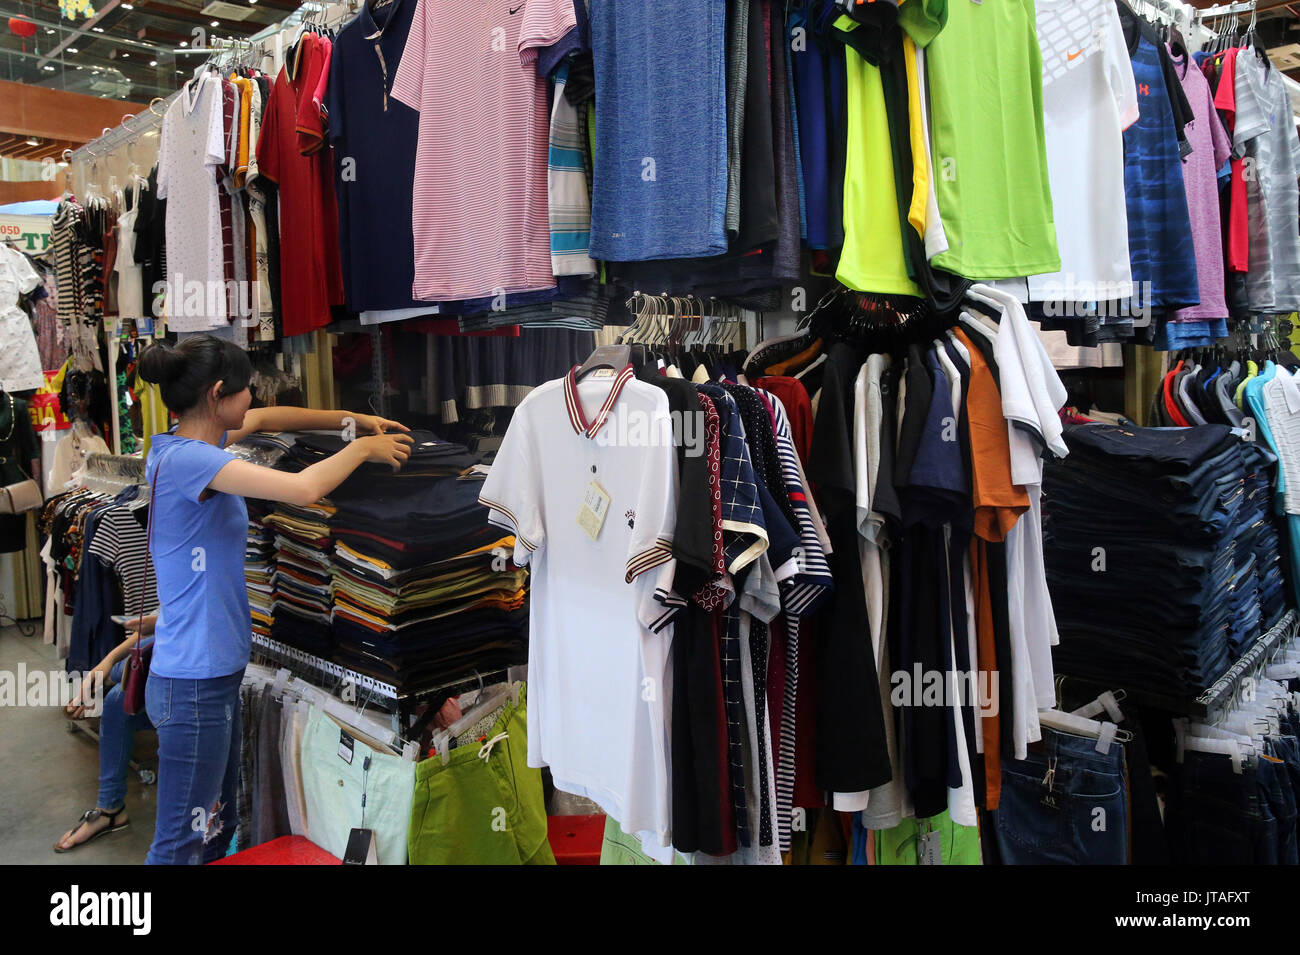 Hangers with clothes, Clothing Market, Ho Chi Minh City, Vietnam, Indochina, Southeast Asia, Asia Stock Photo